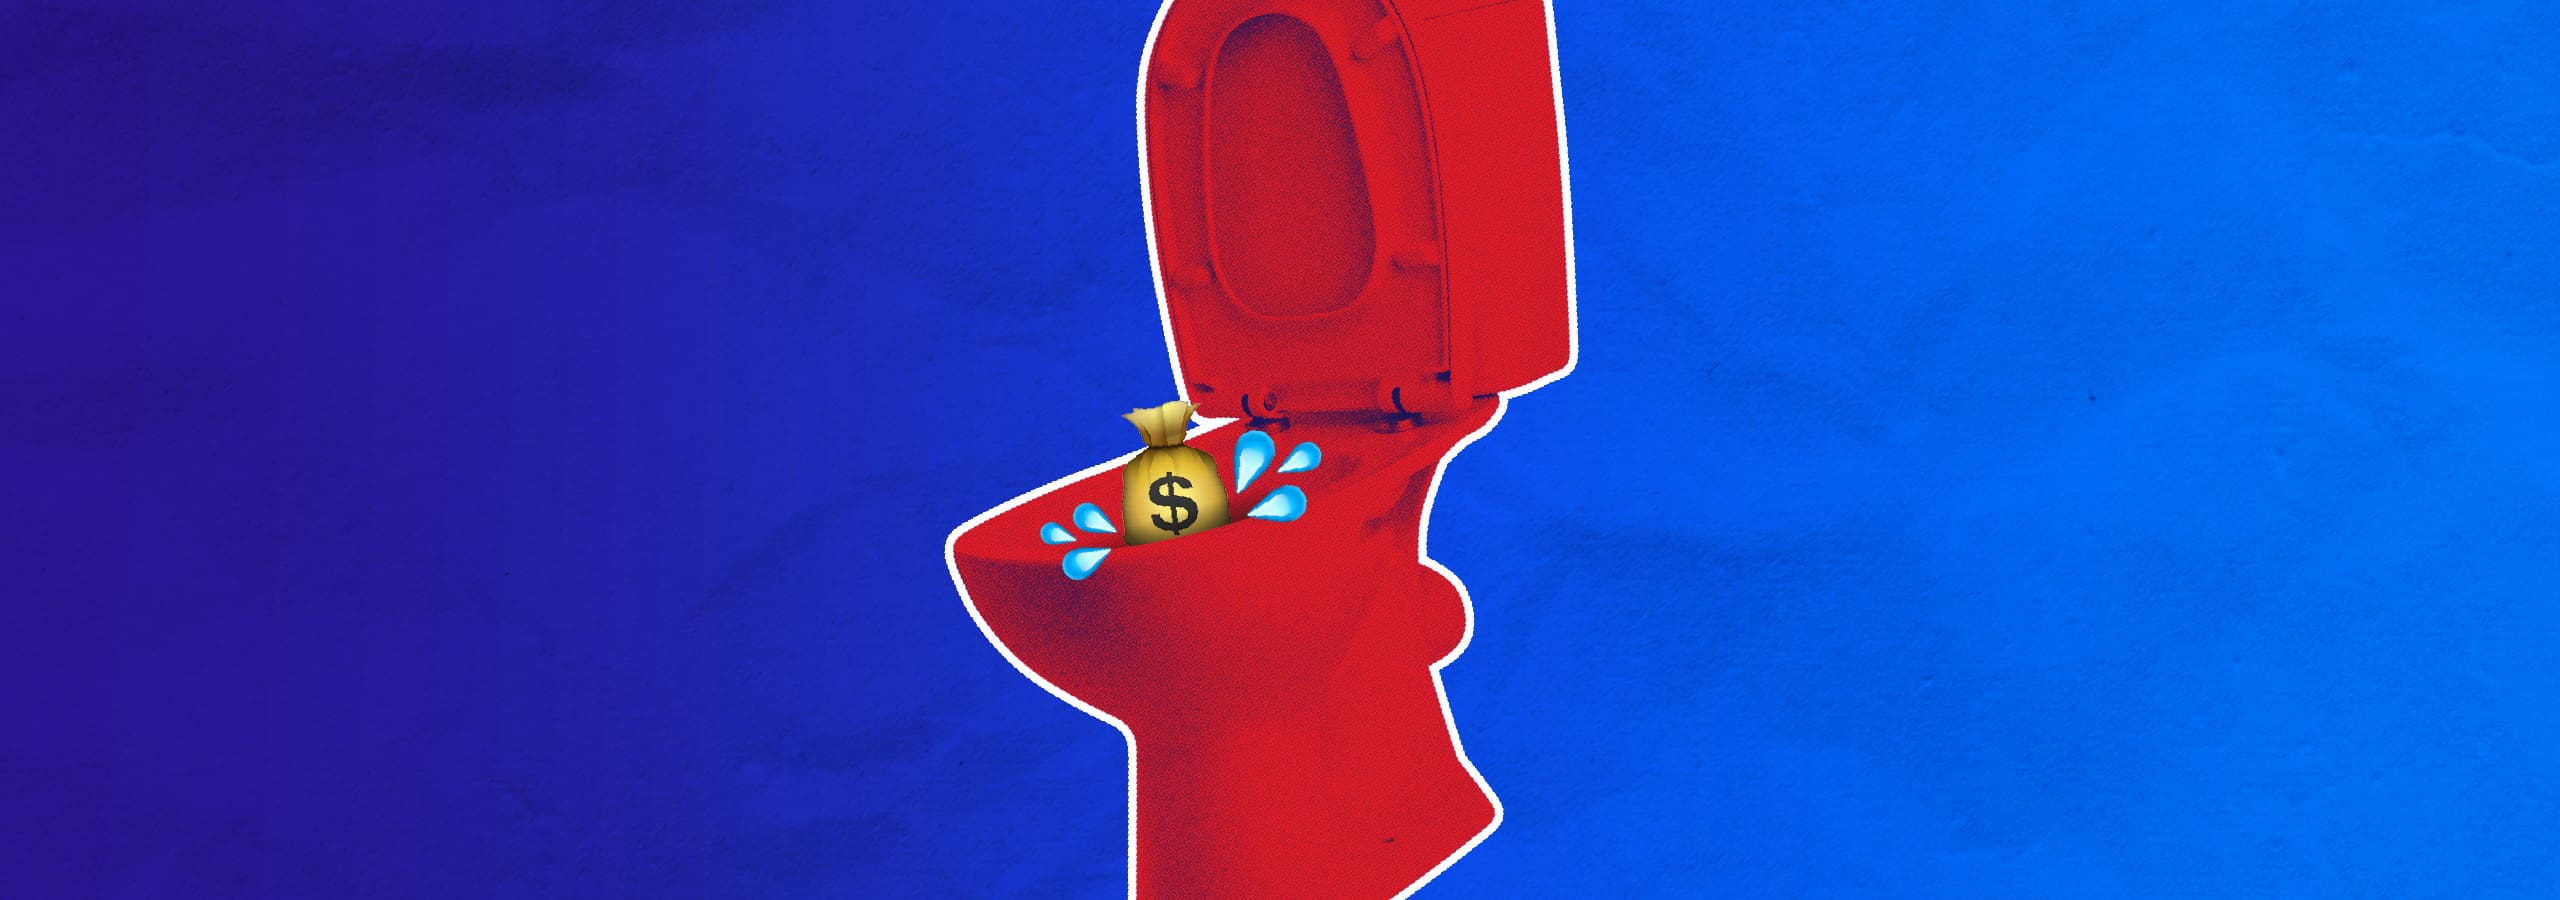 How To Stop Your Profits from Going Down the Toilet